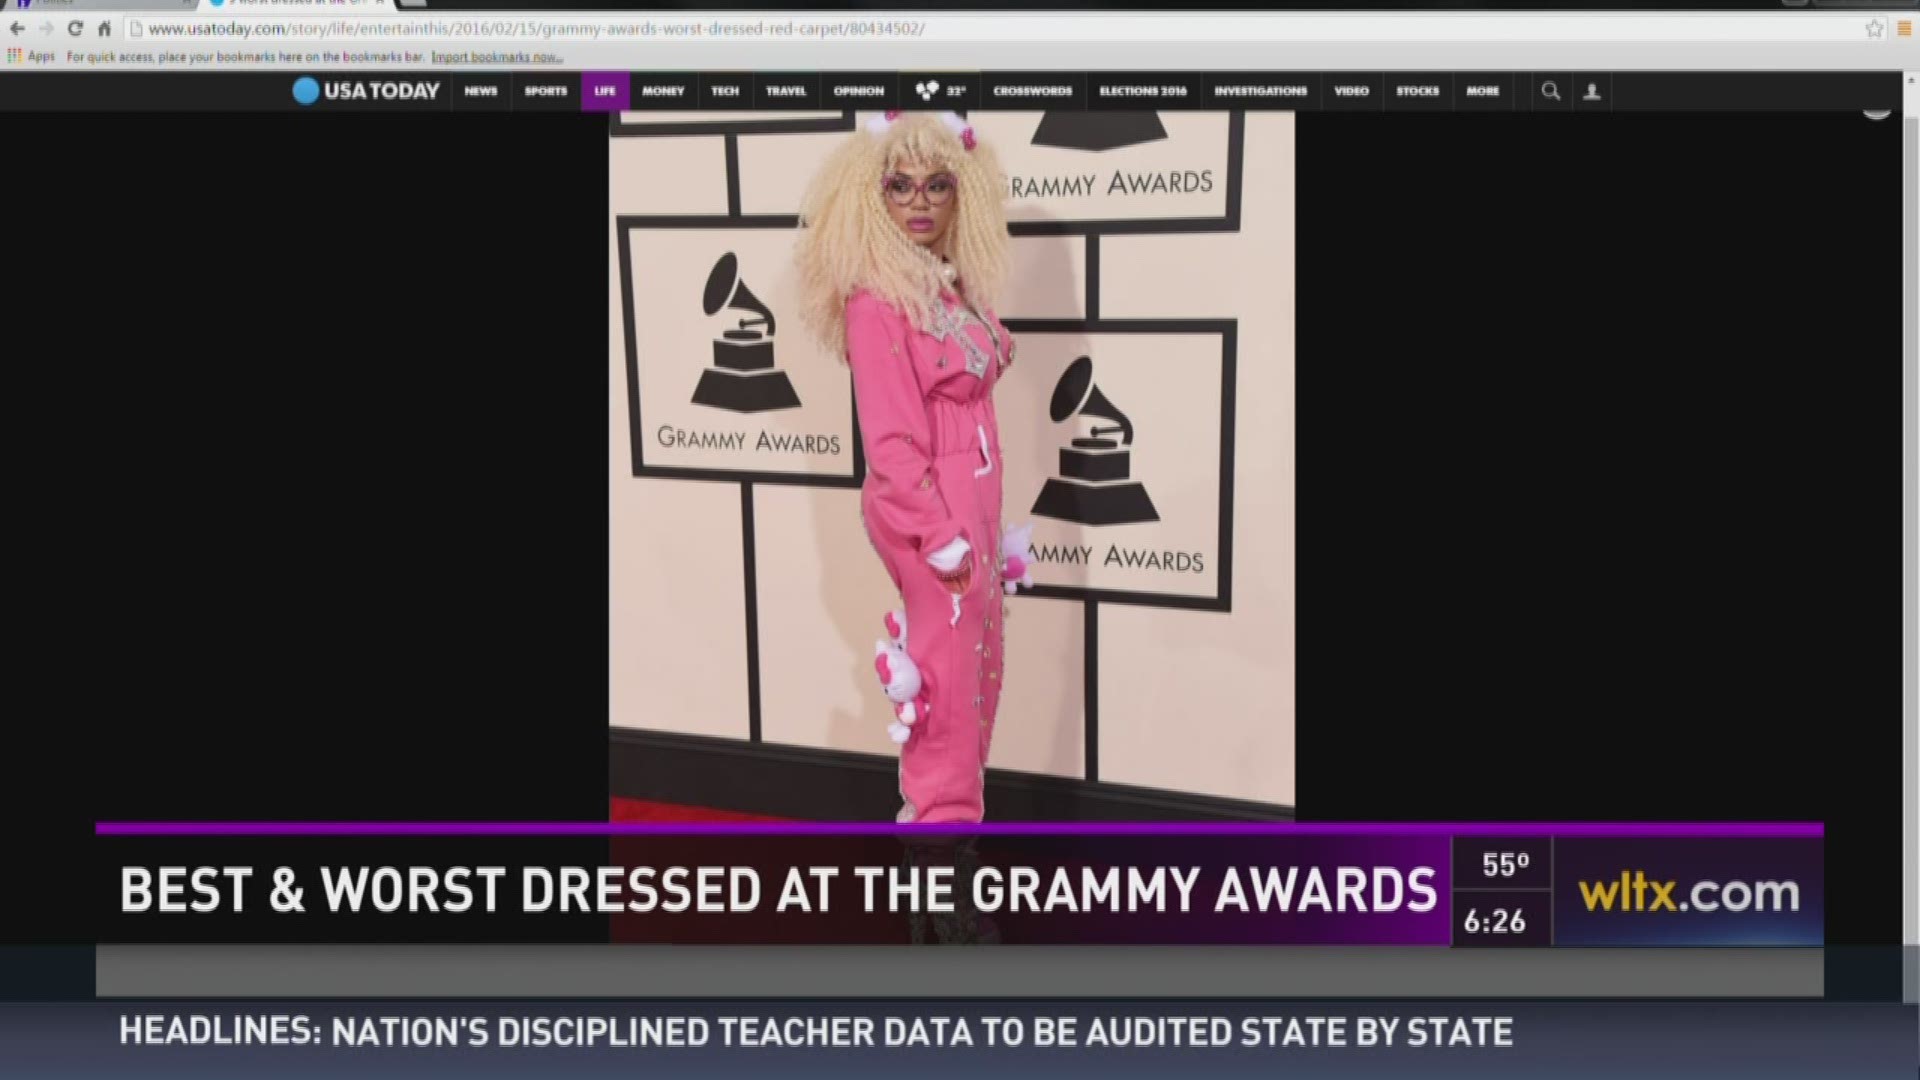 Who can resist dishing on the wardrobe choices whenever there's an awards show?  We certainly can't!  So, Savannah and Deon were joined by our own fashion aficionado, Alicia Zeigler, for another look at the Grammy gowns and garb.